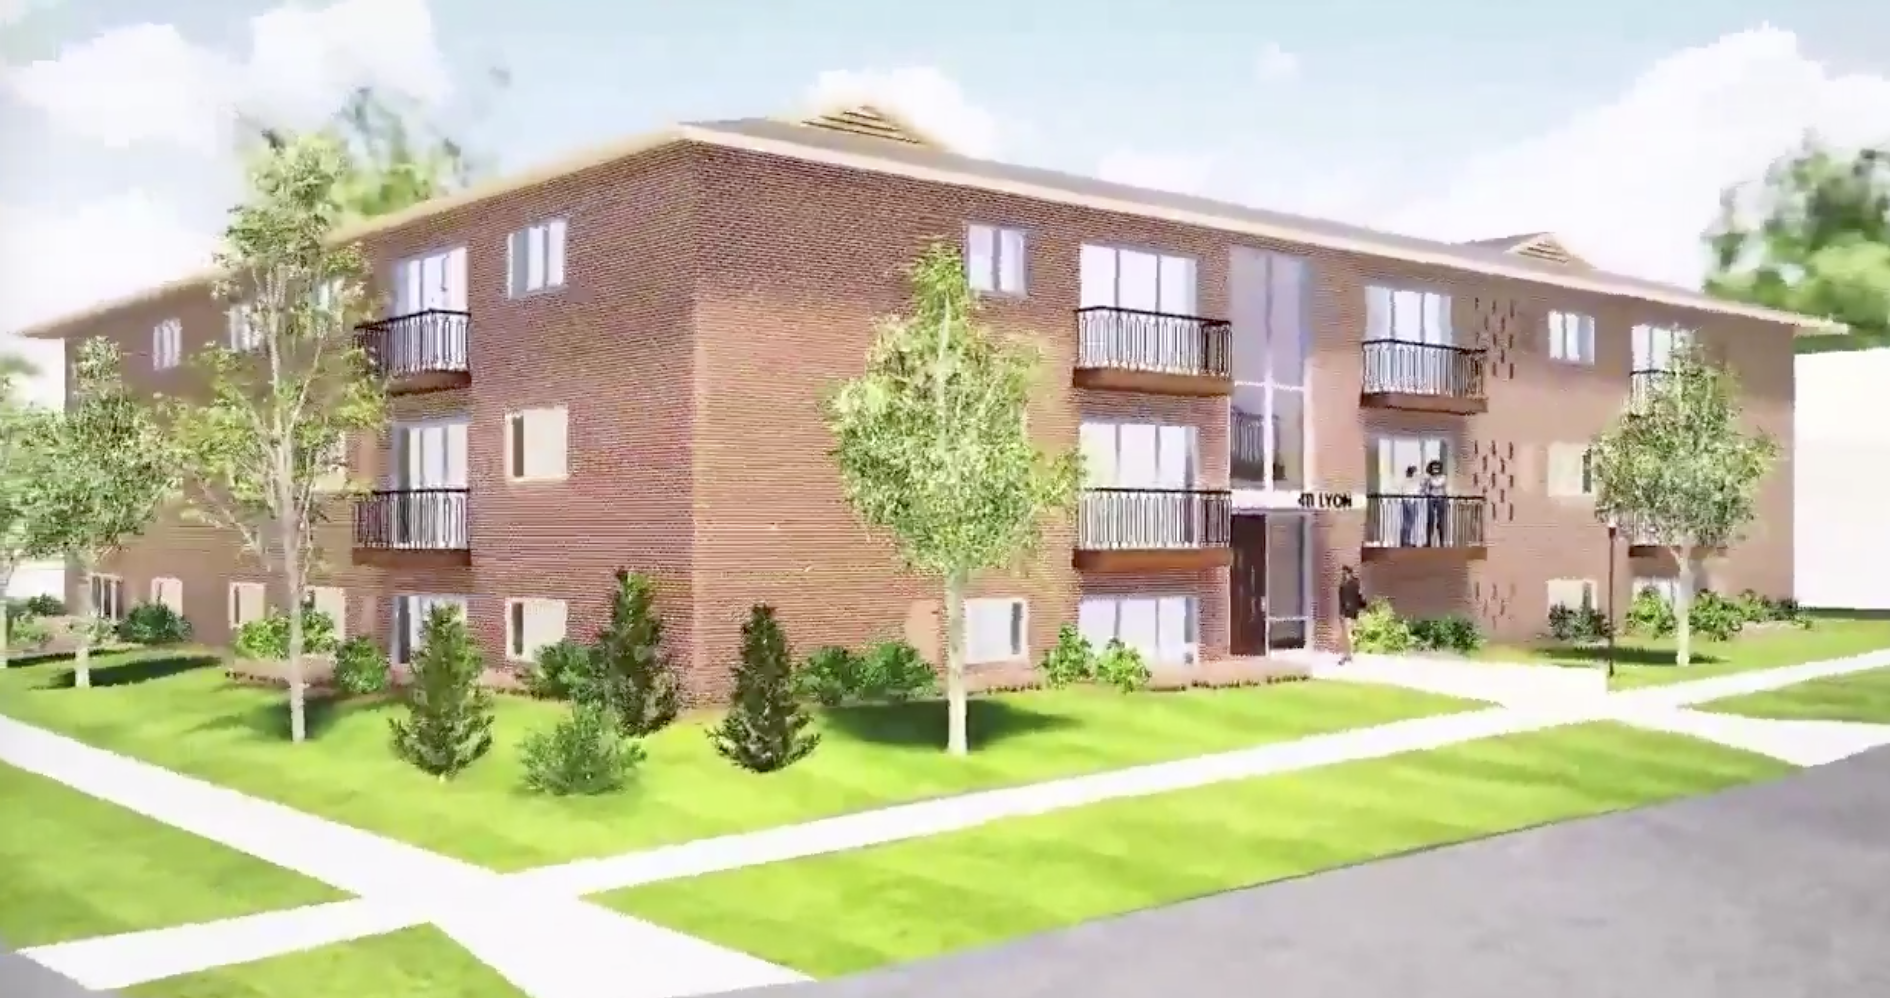 A rendering of a redeveloped Georgia Manor Apartments.